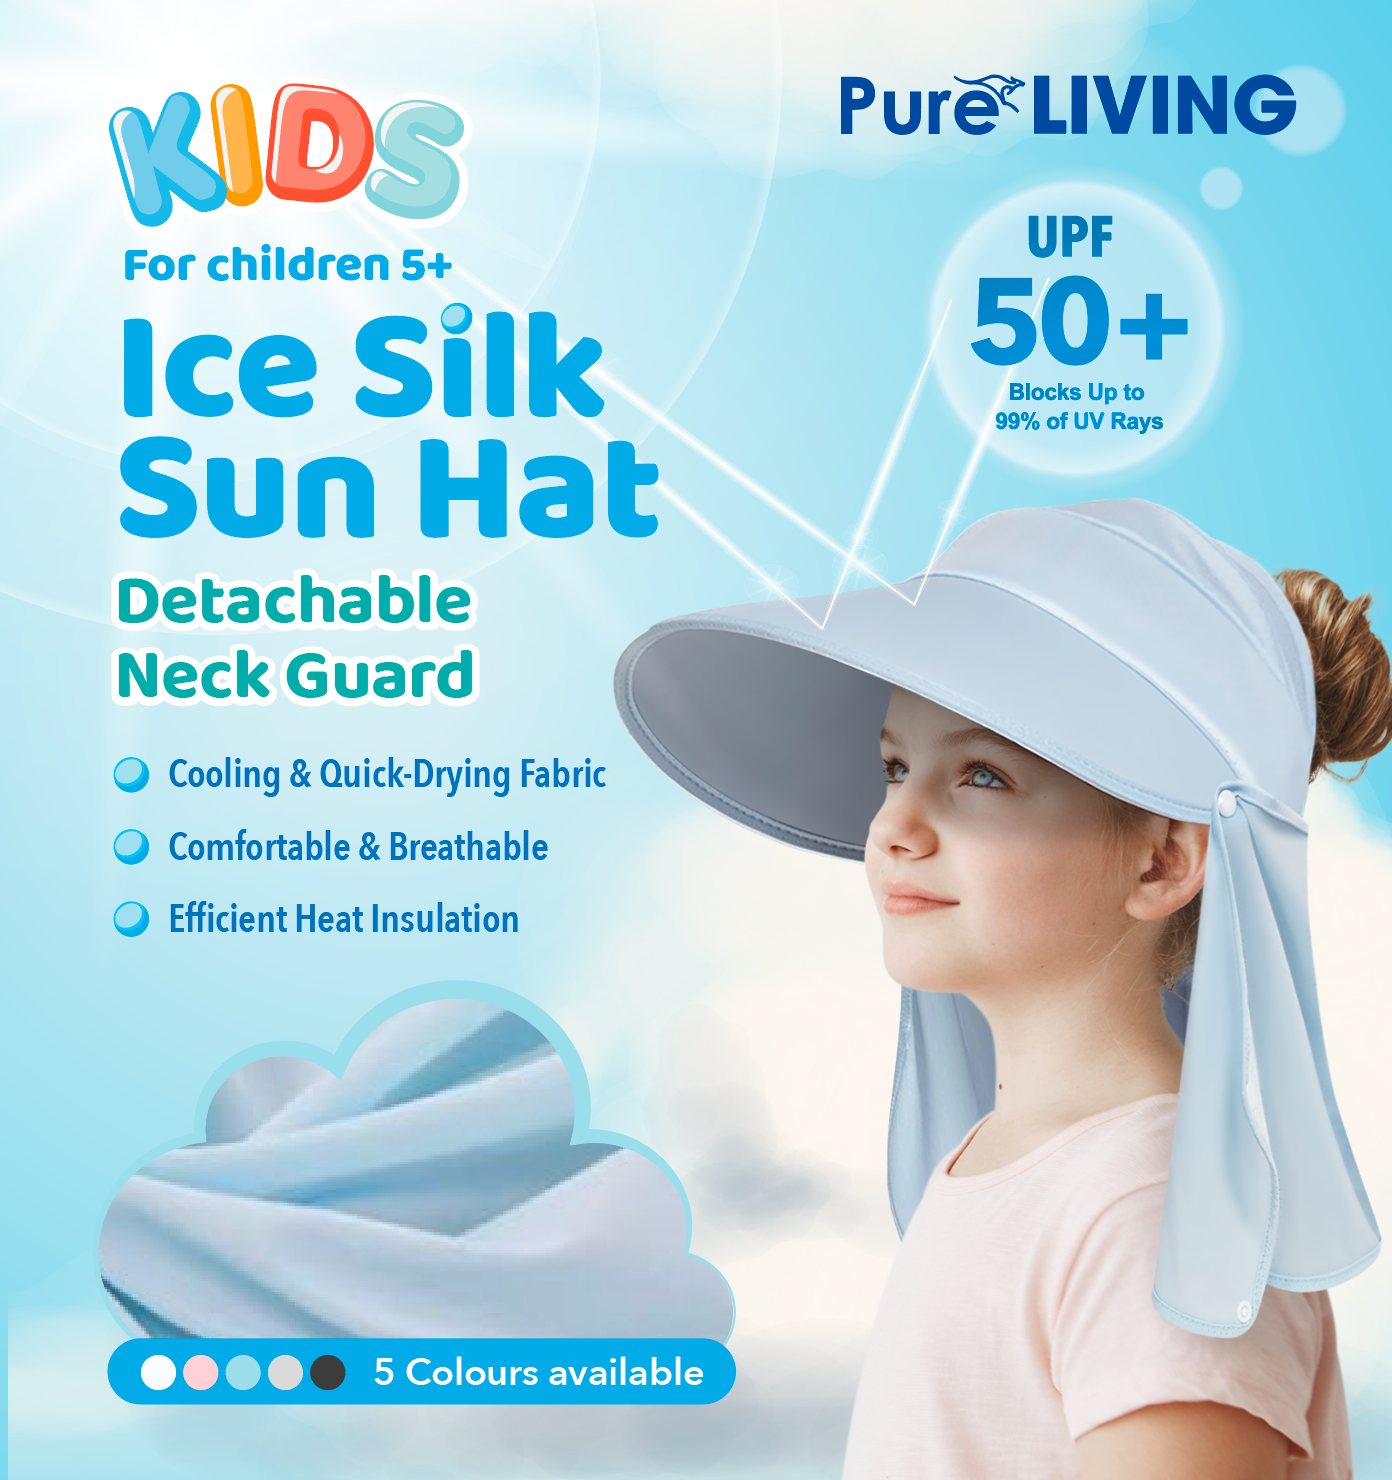 Pure Living Introduces a Distinctive Summer Product Line, Redefining Comfort and Wellness